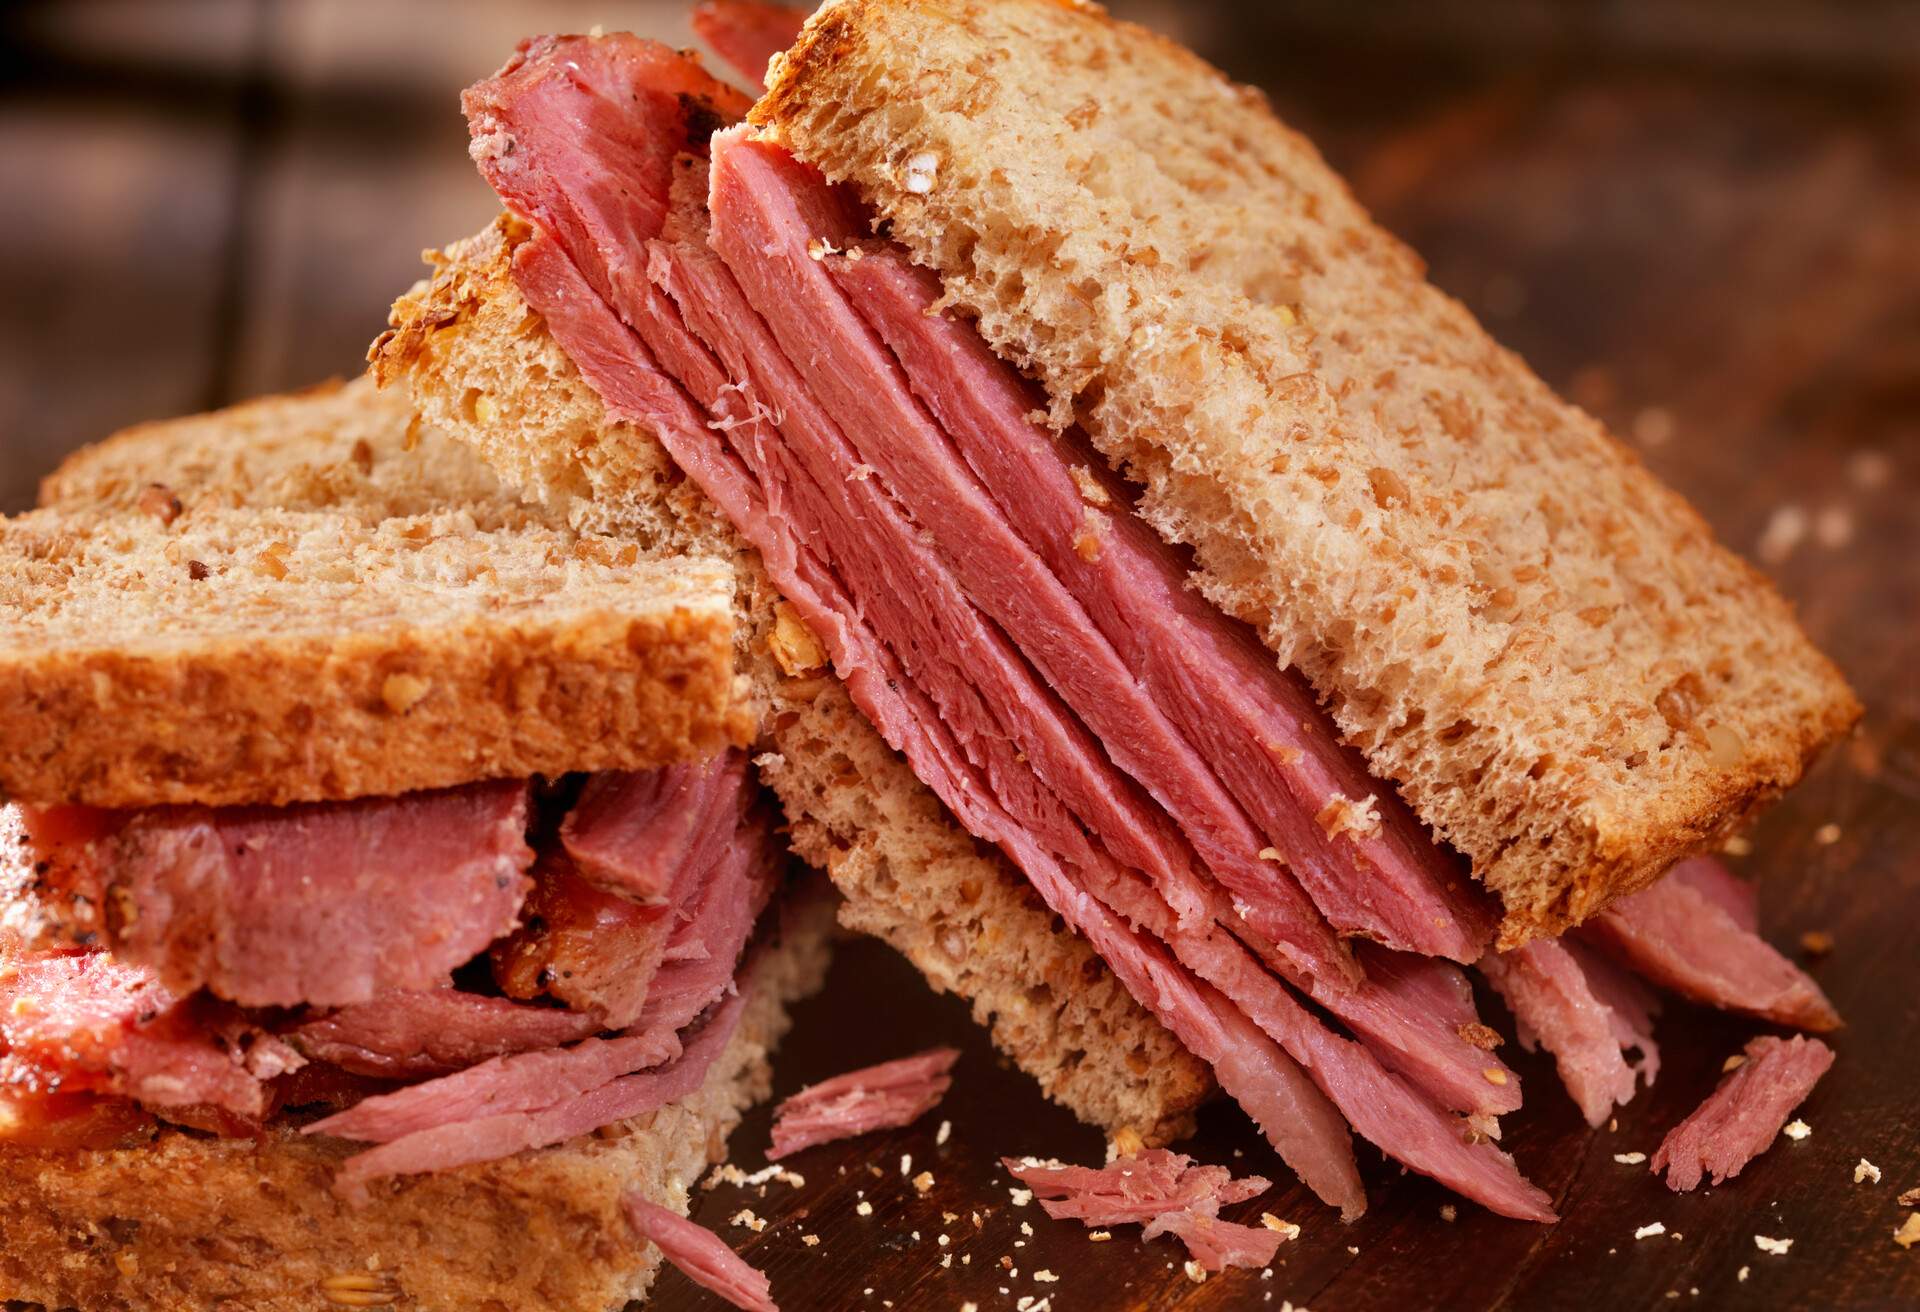 Smoked Meat Sandwich- Photographed on Hasselblad H3D2-39mb Camera